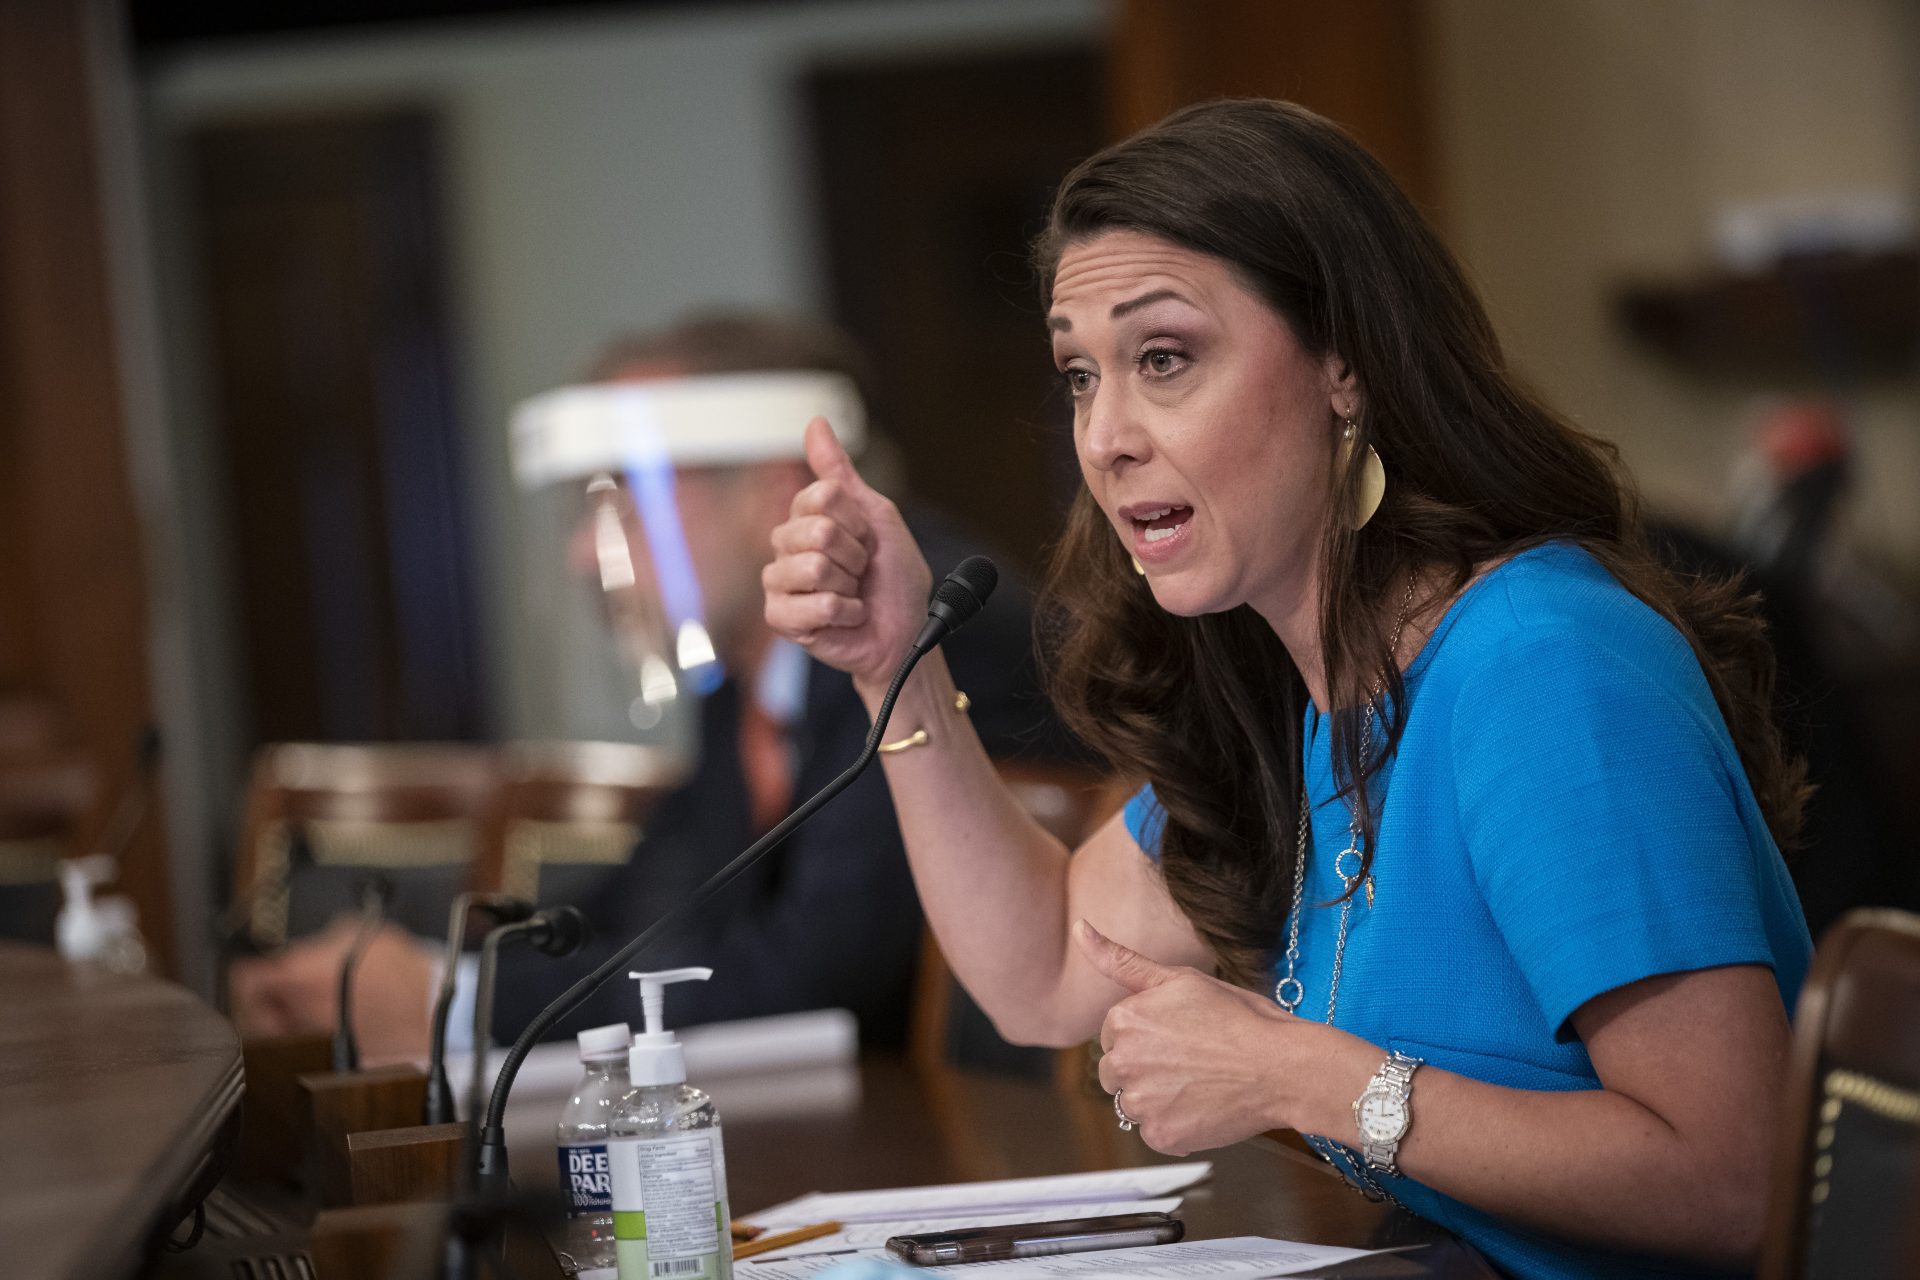 In this Thursday, Jan. 7, 2021 file photo image taken from video, Rep. Jaime Herrera Beutler, R-Wash., speaks as the House debates the objection to confirm the Electoral College vote from Pennsylvania, at the U.S. Capitol.